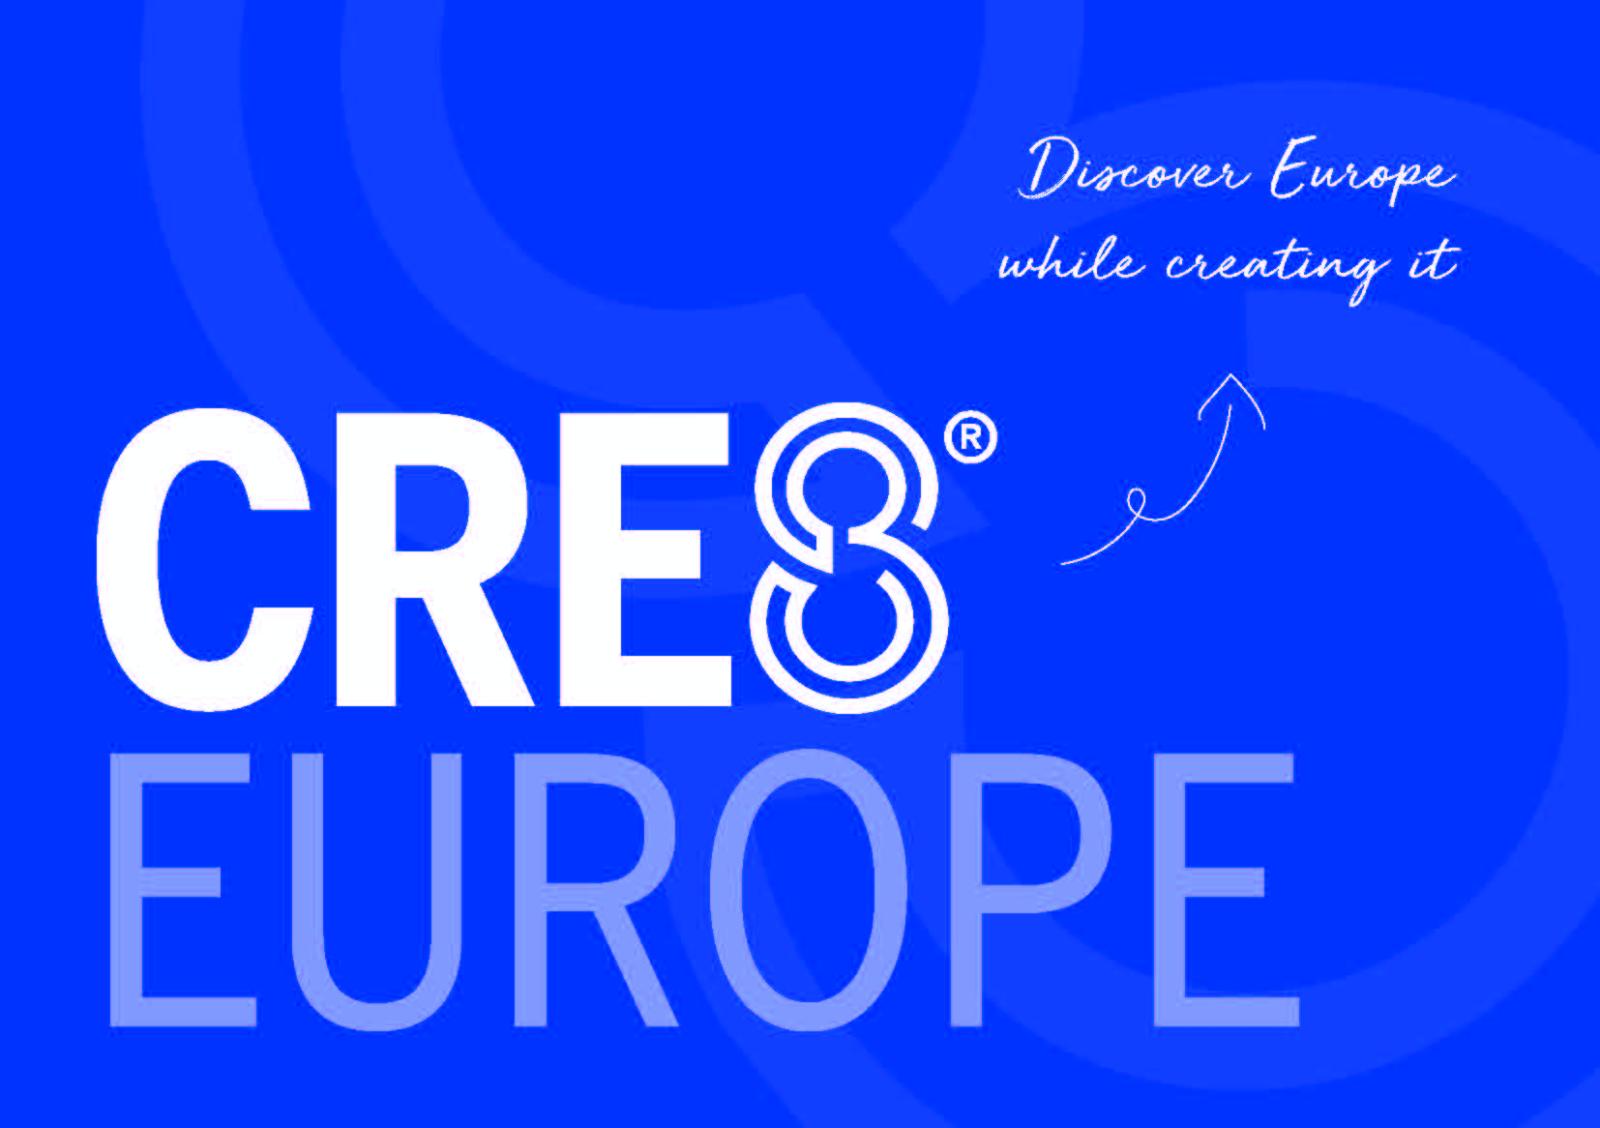 CRE8 Europe while